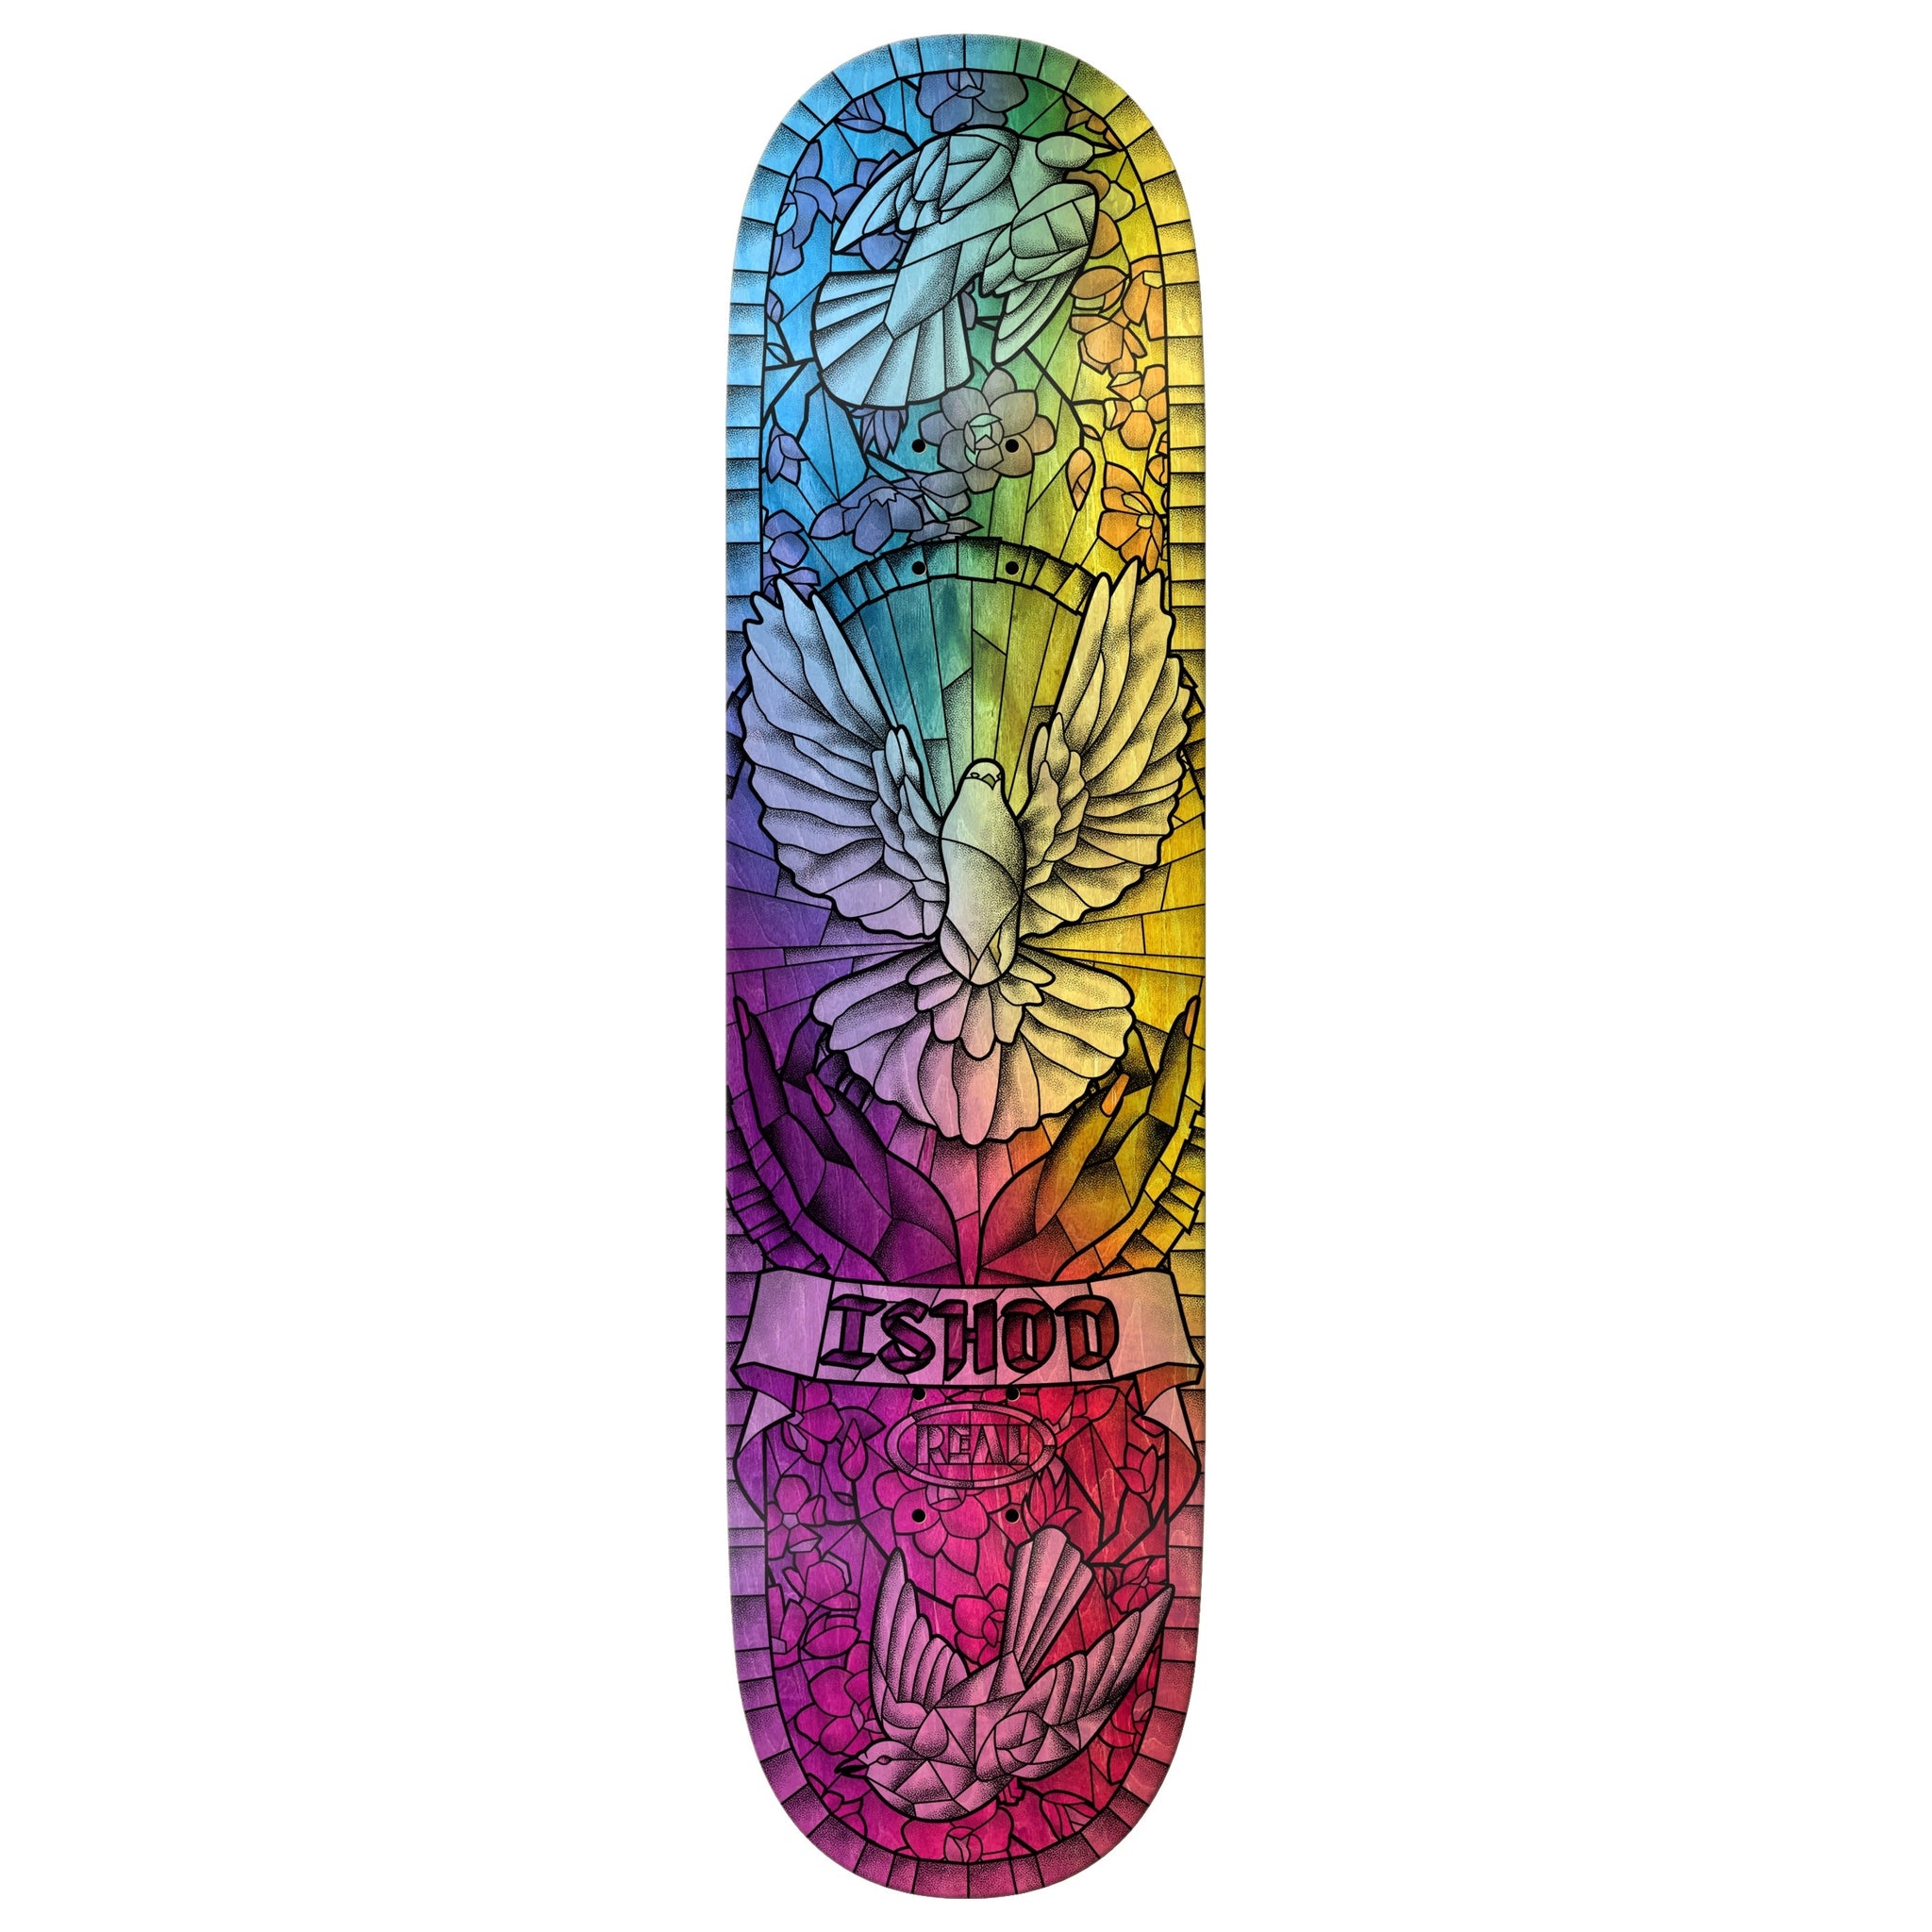 Real Skateboards "Ishod Wair- Cathedral Chromatic" 8.12" Deck